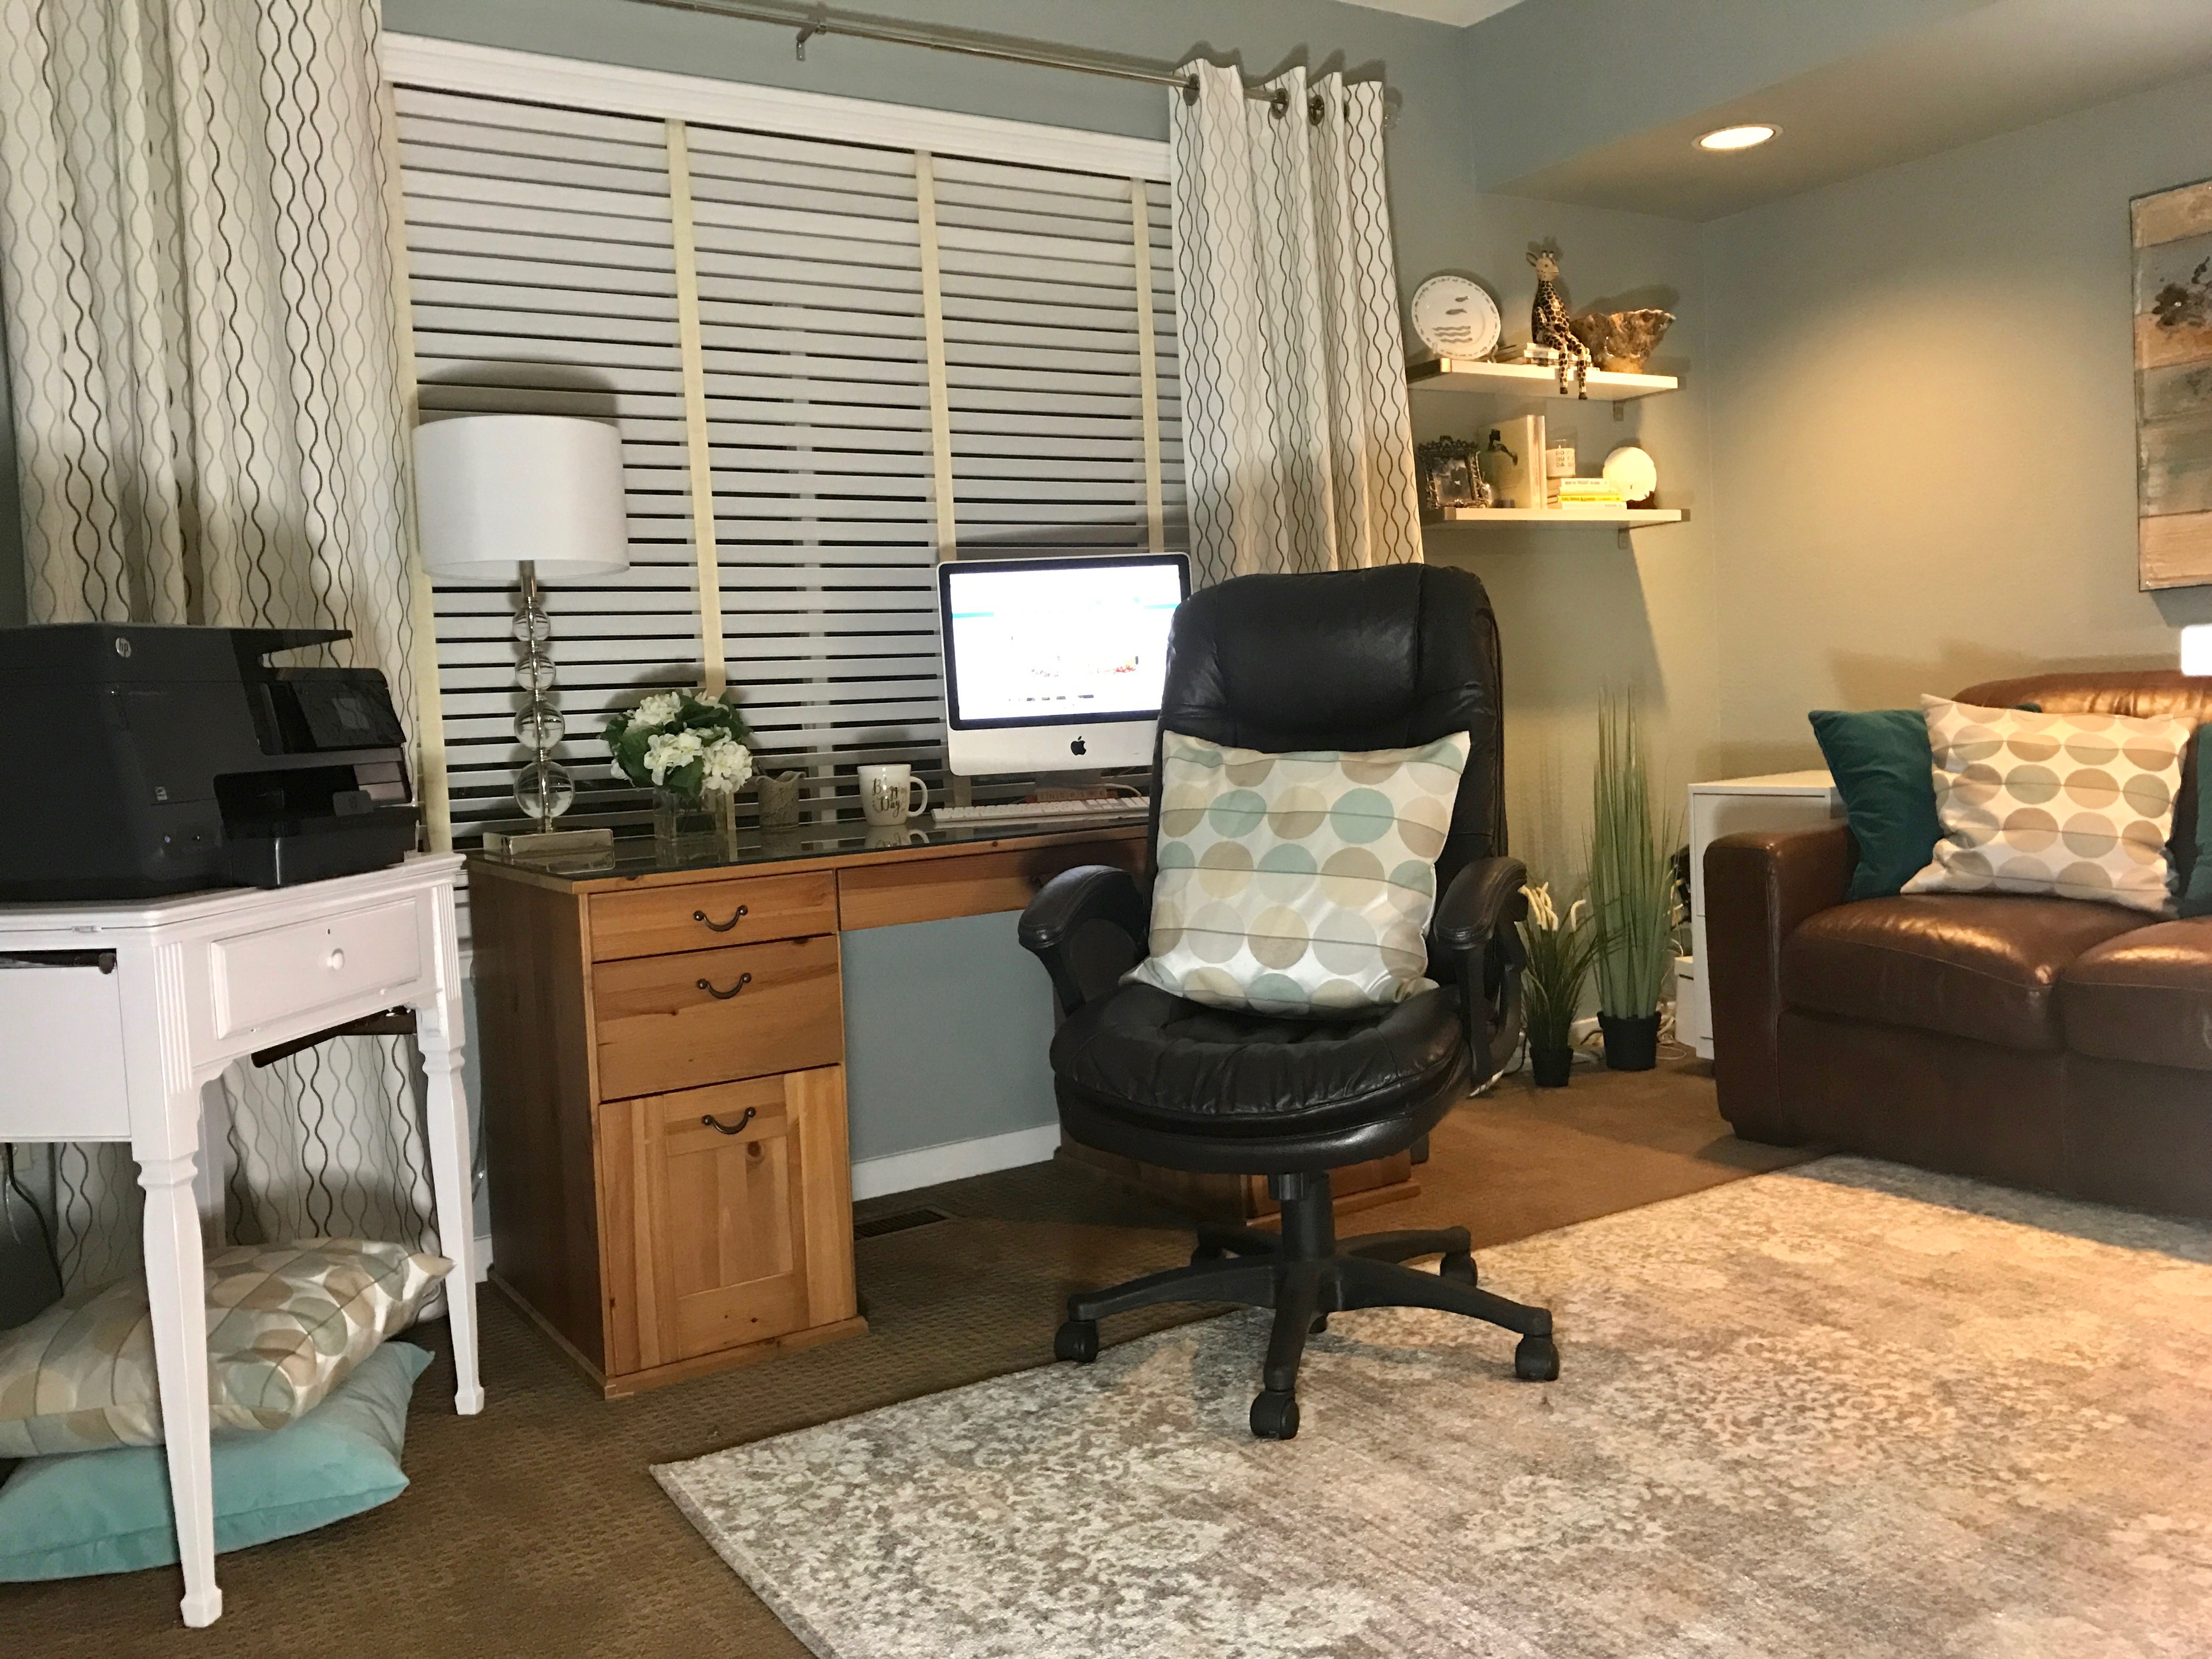 ORC: The Home Office Guest Room Week 6 - The Reveal